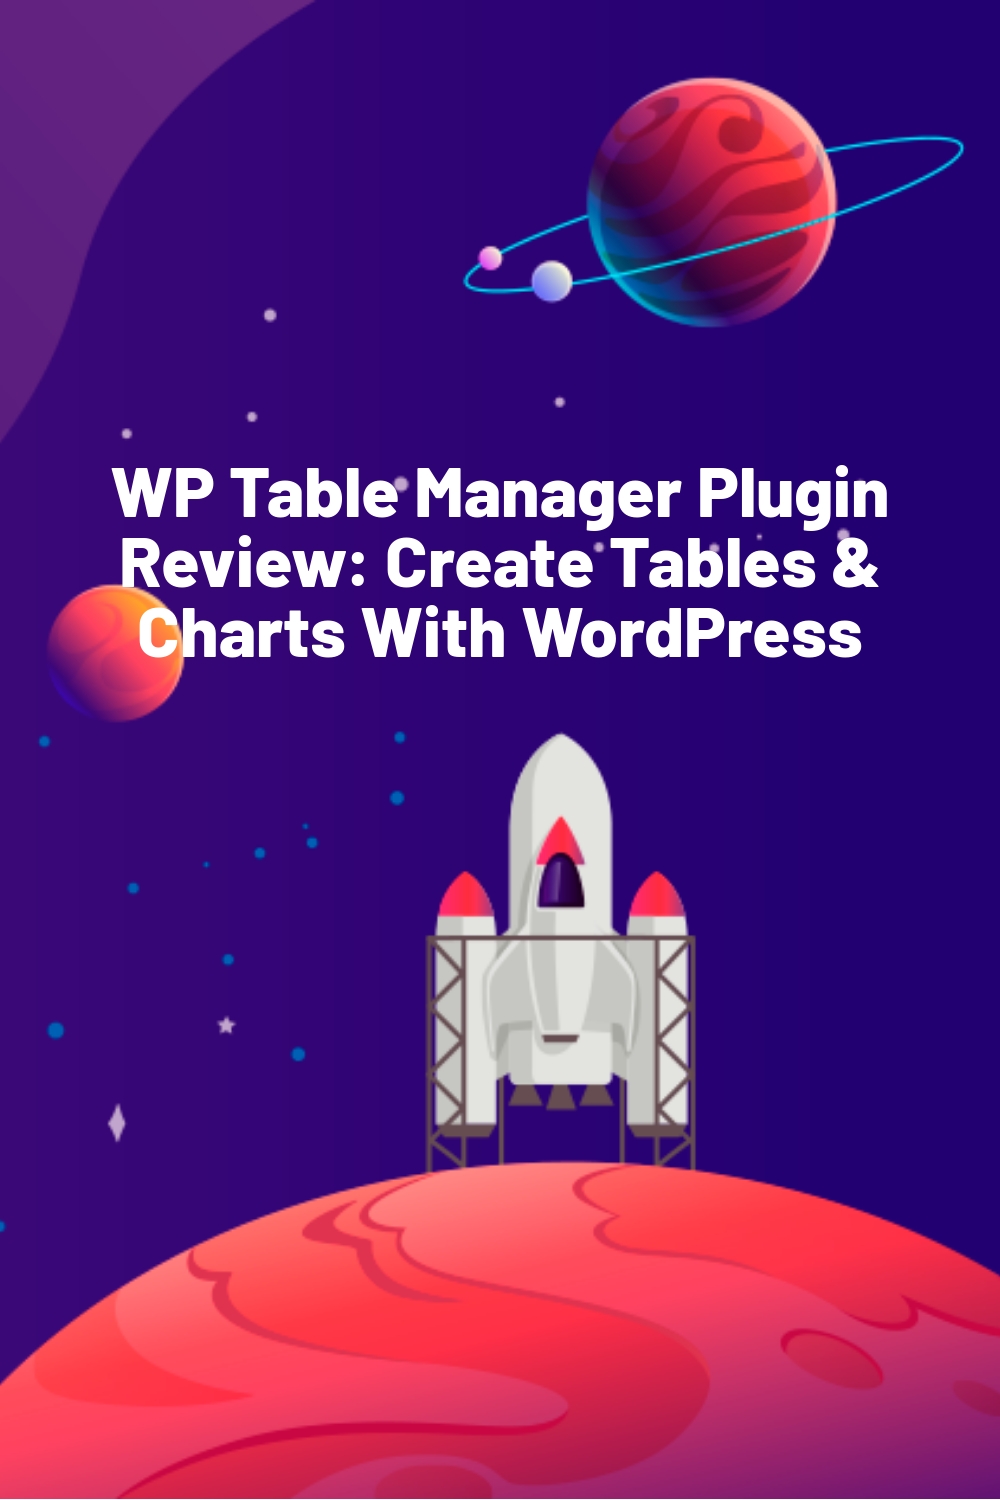 WP Table Manager Plugin Review: Create Tables & Charts With WordPress